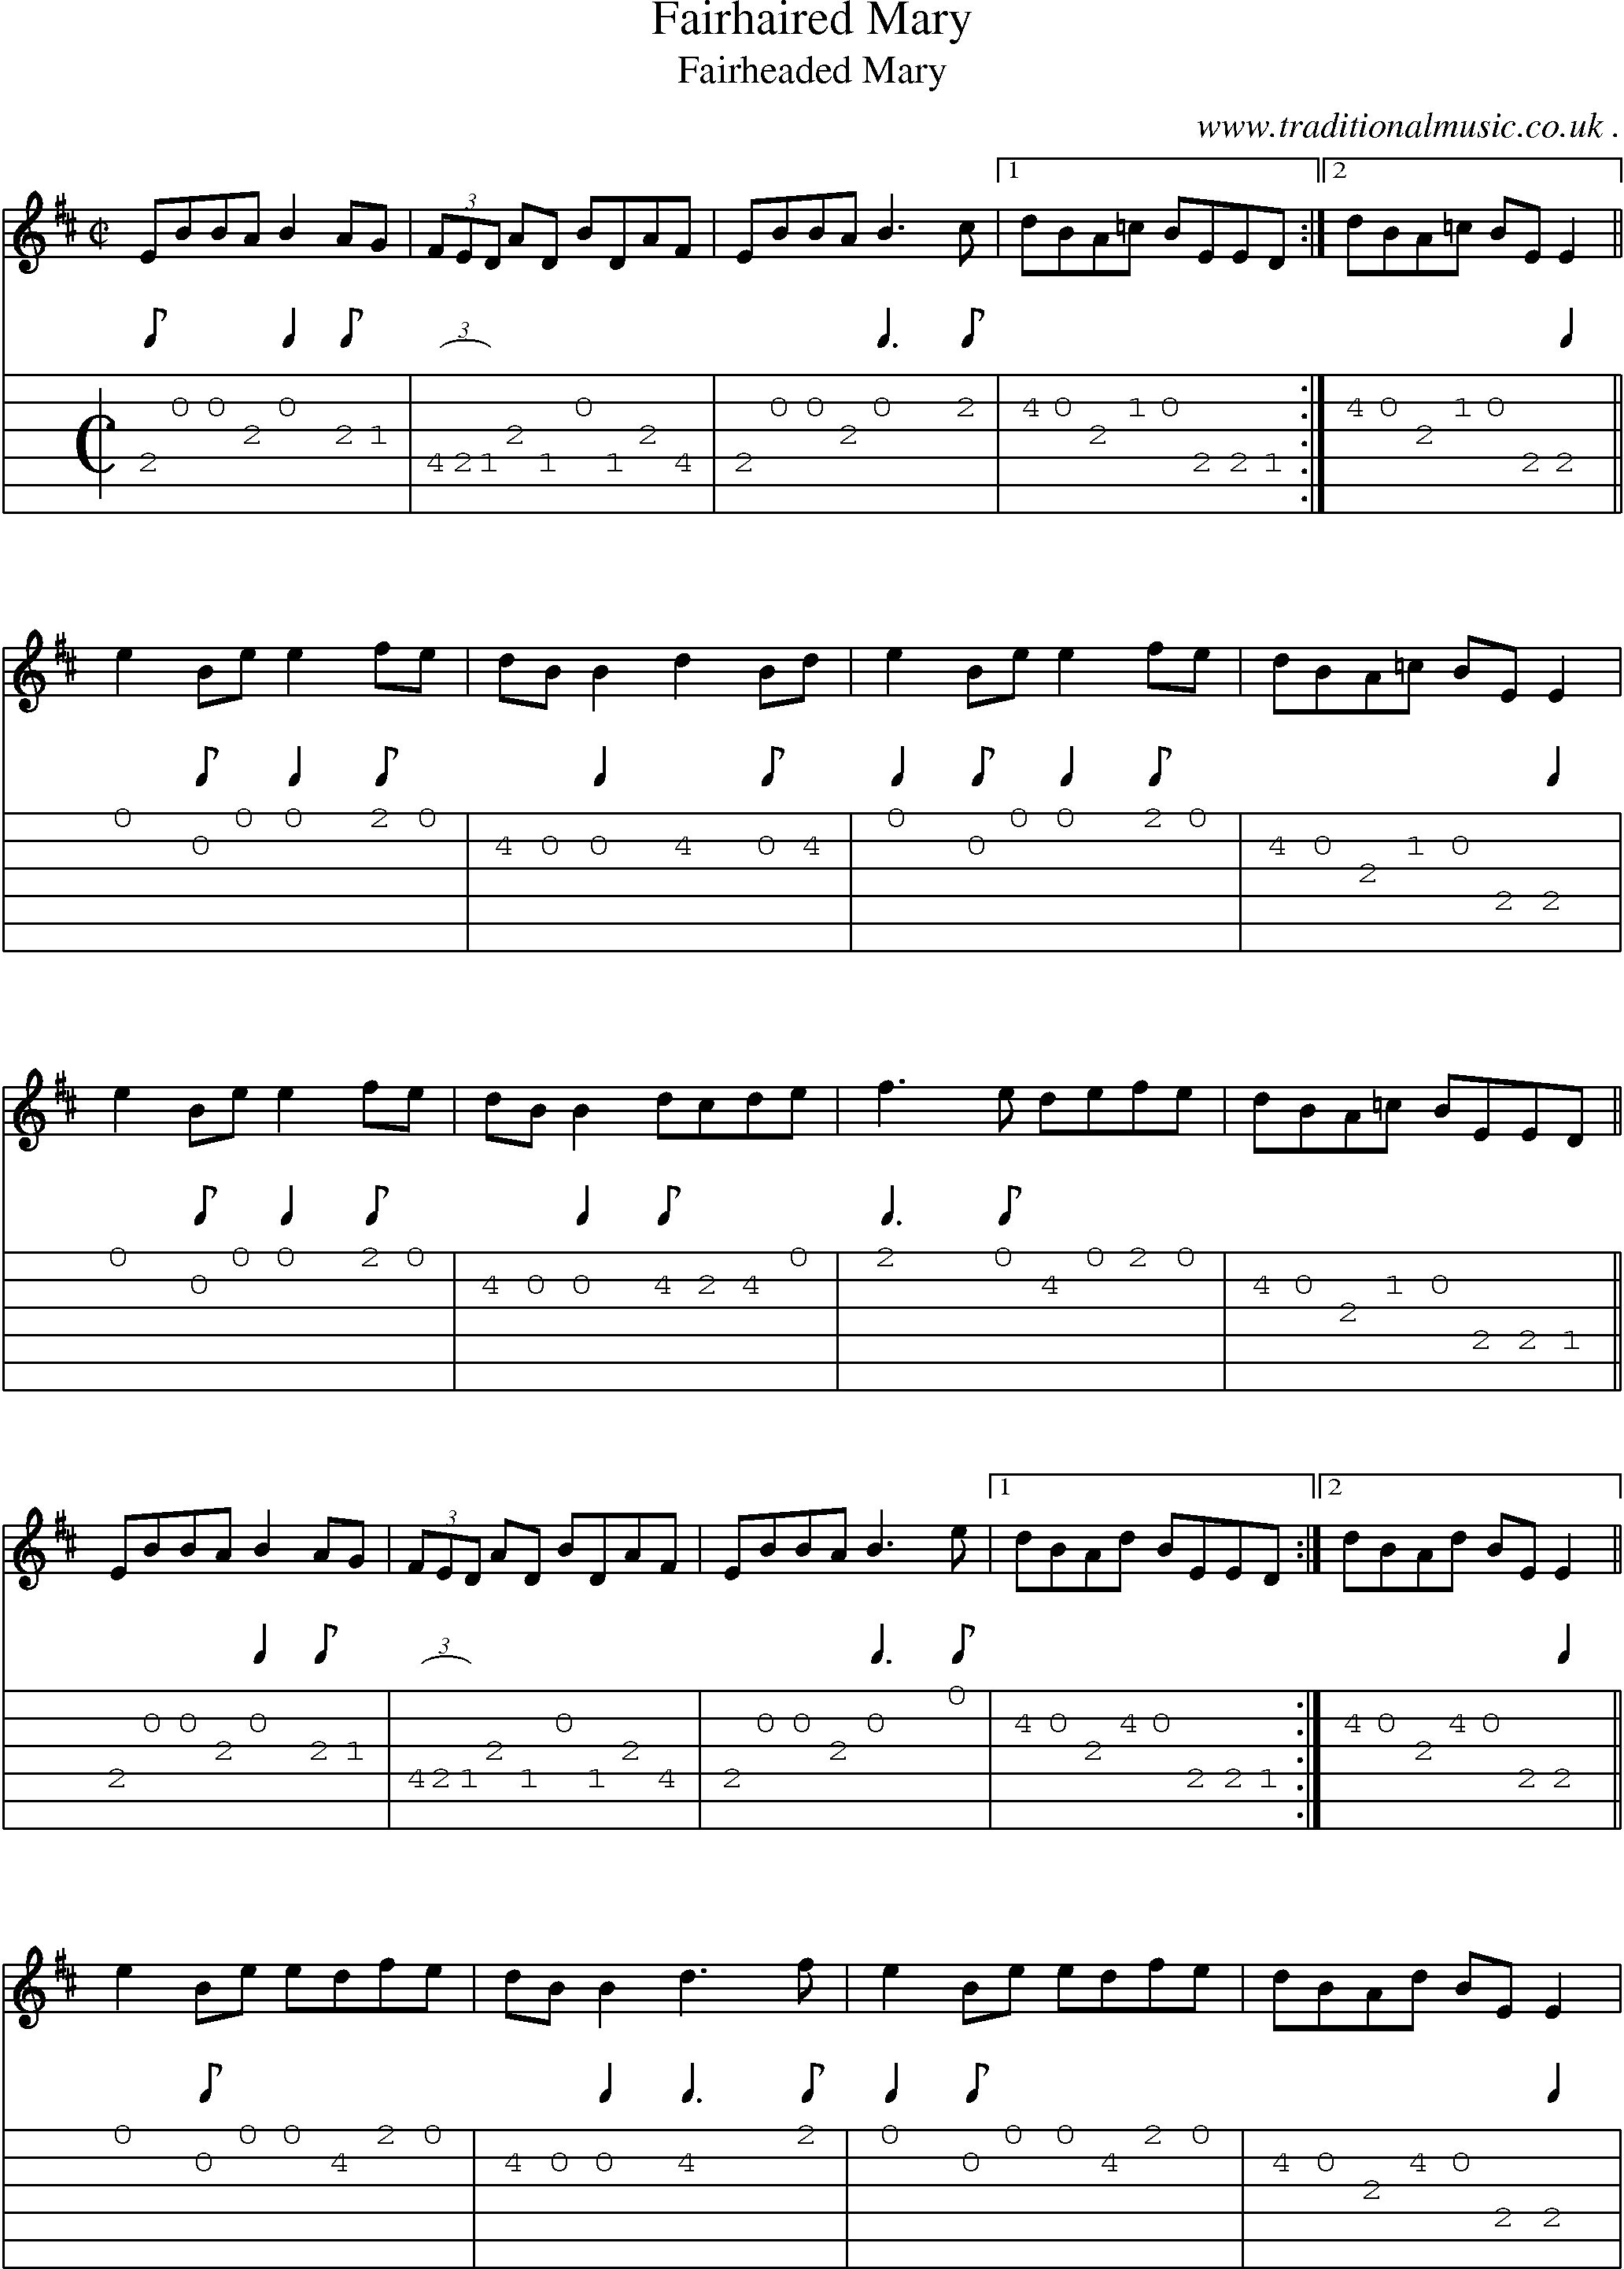 Sheet-Music and Guitar Tabs for Fairhaired Mary